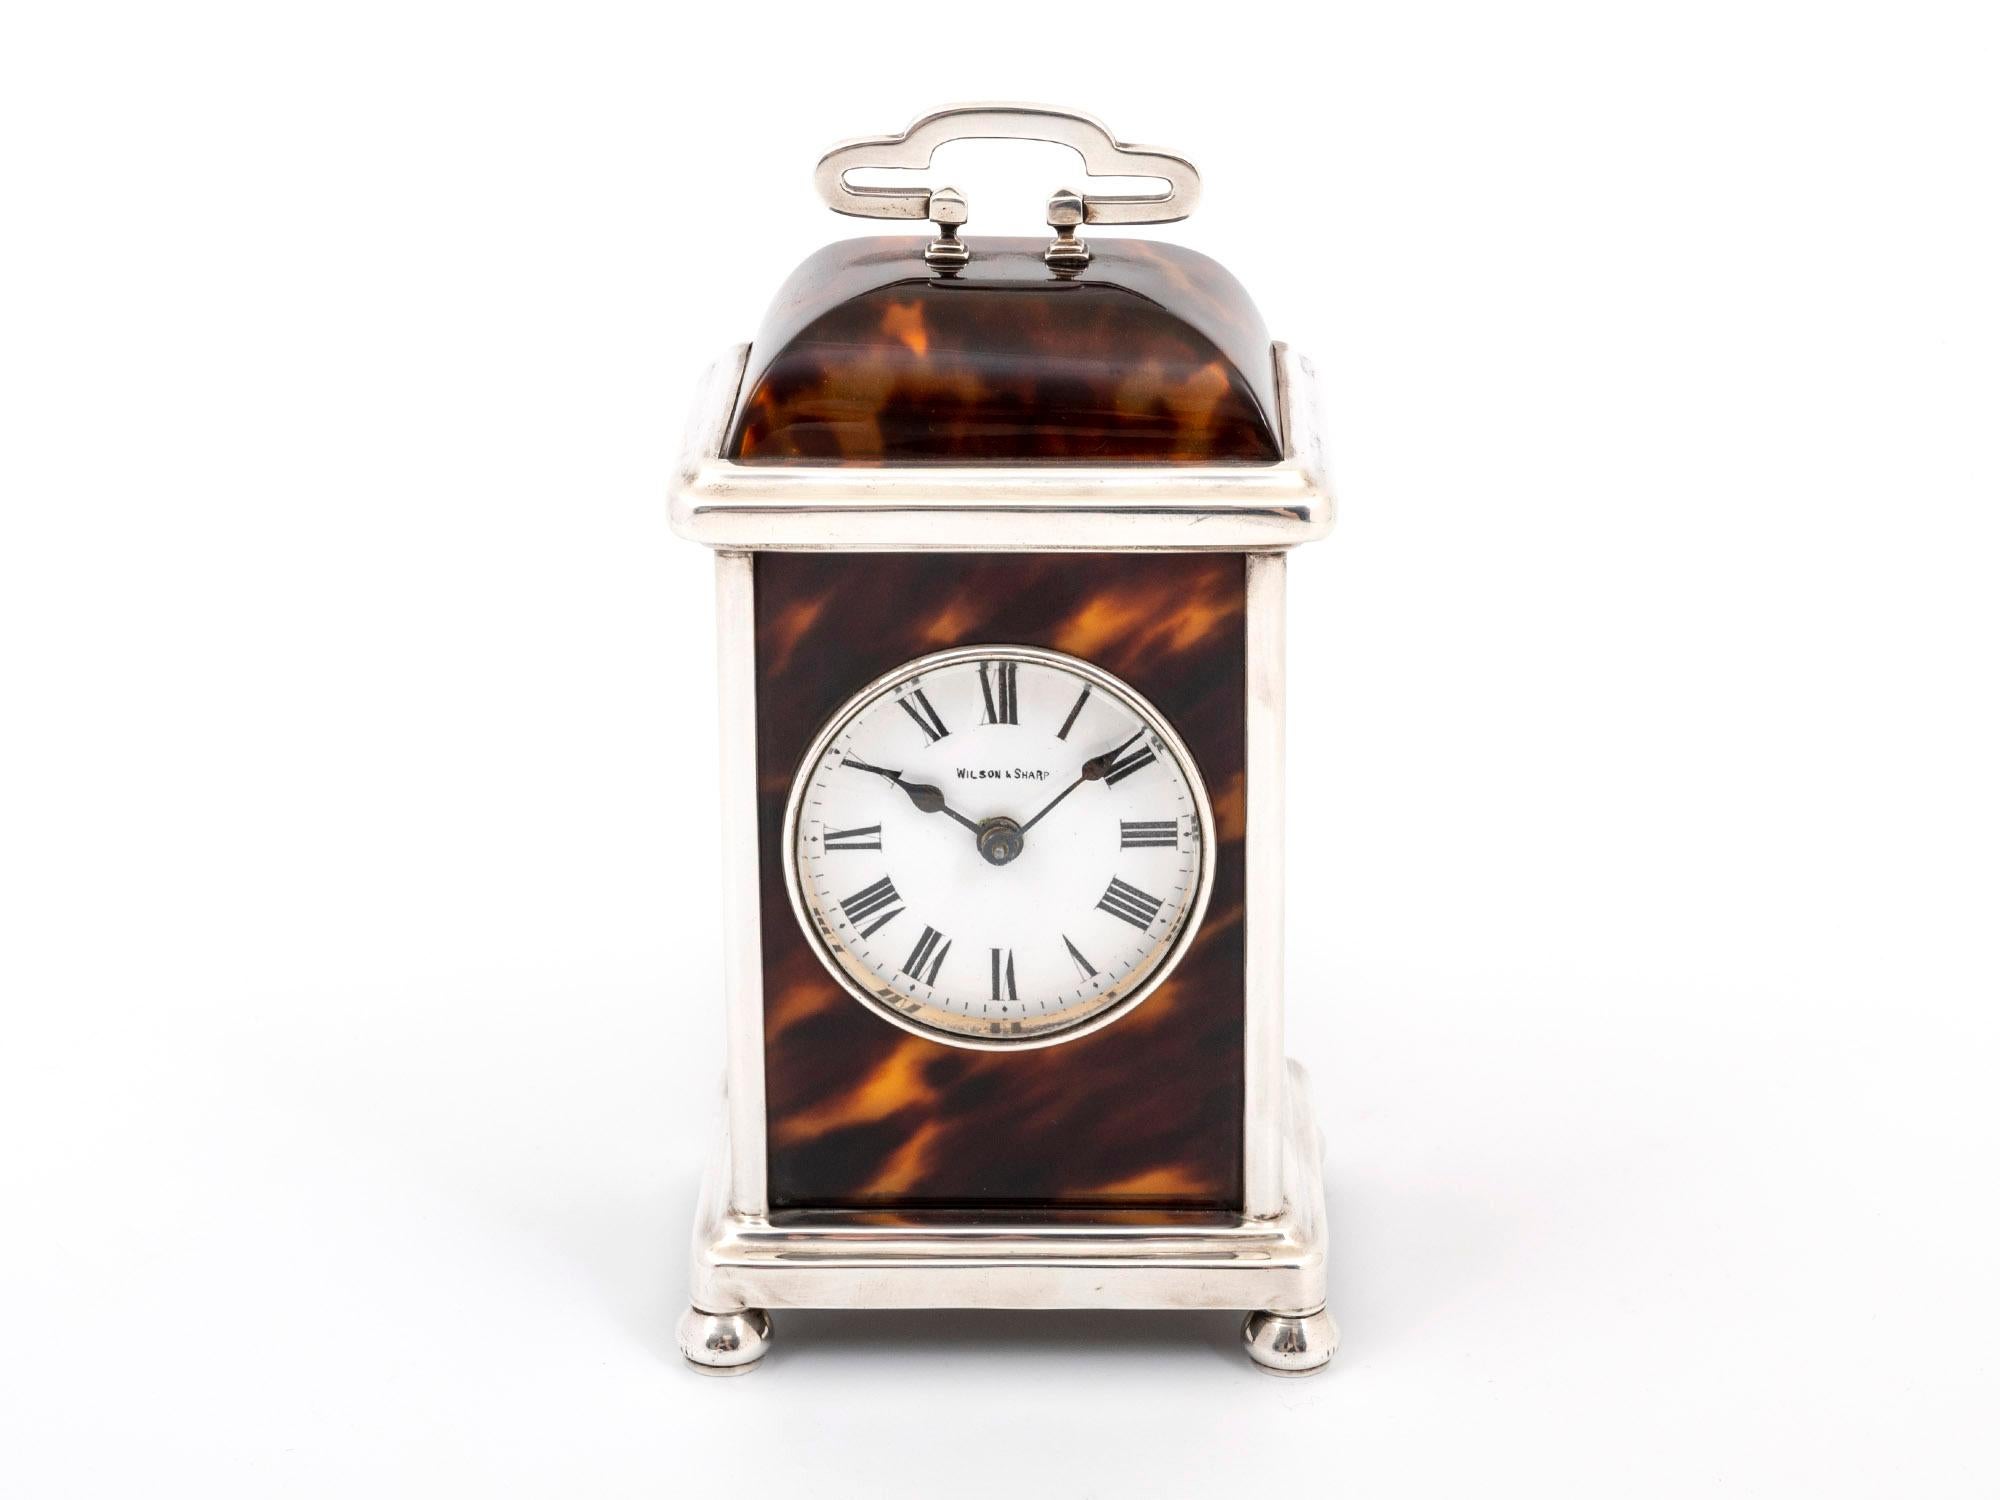 This is a charming little tortoiseshell and sterling silver carriage clock by Birmingham Silversmiths, Adie Brothers.

This Sterling Silver Carriage Clock has beautifully figured Tortoiseshell panels. Featuring a wonderfully classic dome-shaped